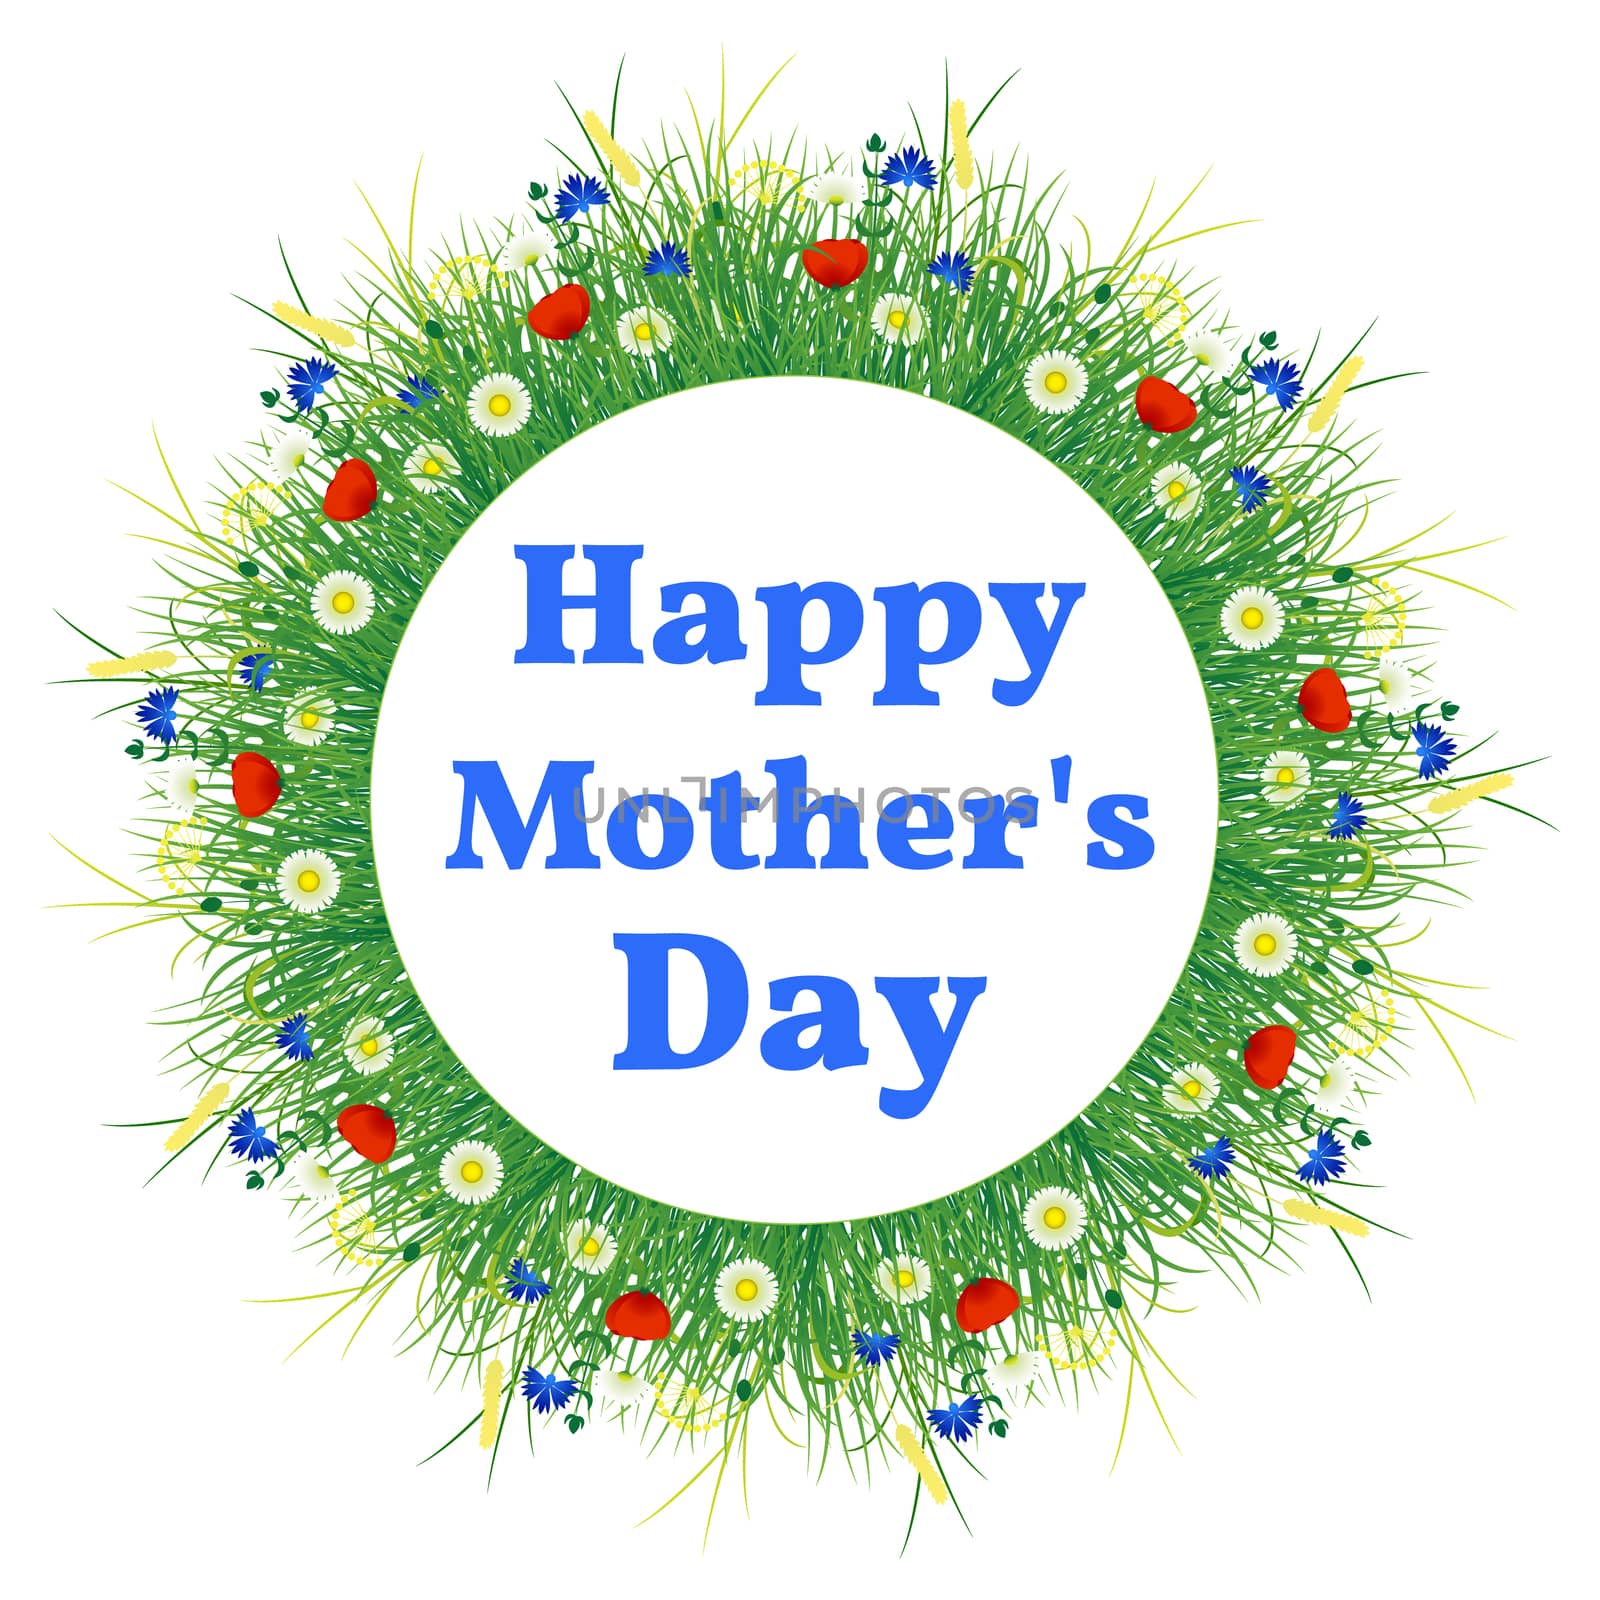 Happy Mothers Day. Background of a wreath of meadow flowers by Julia_Faranchuk